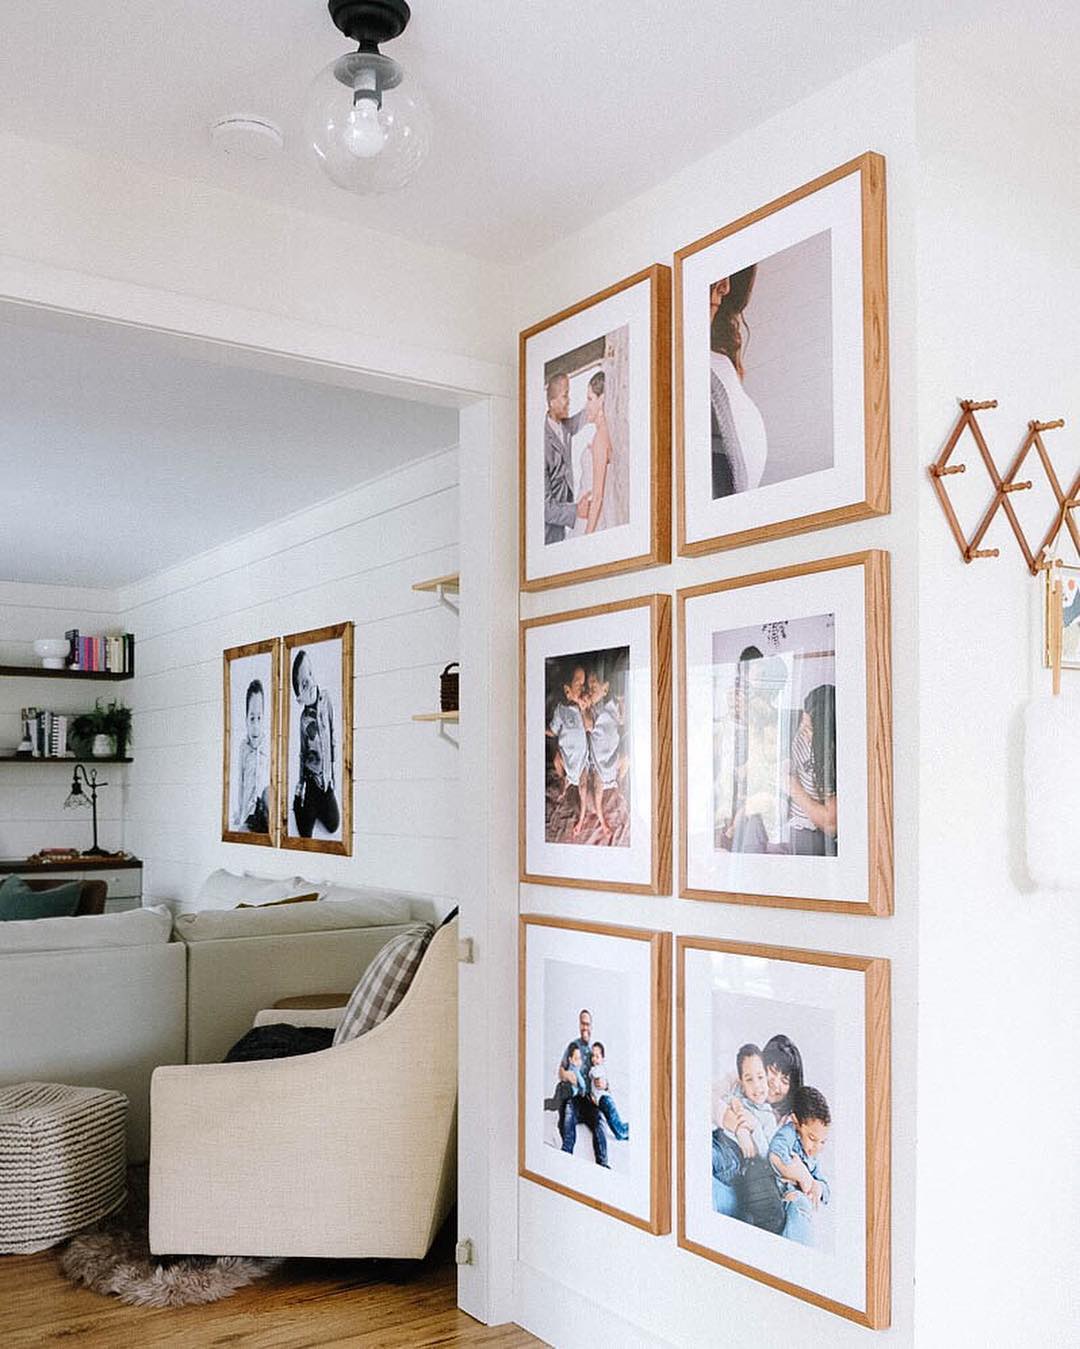 Gallery wall of family photos in Posterjack Light Walnut Gallery Frames. Image credit: Thalita Murray